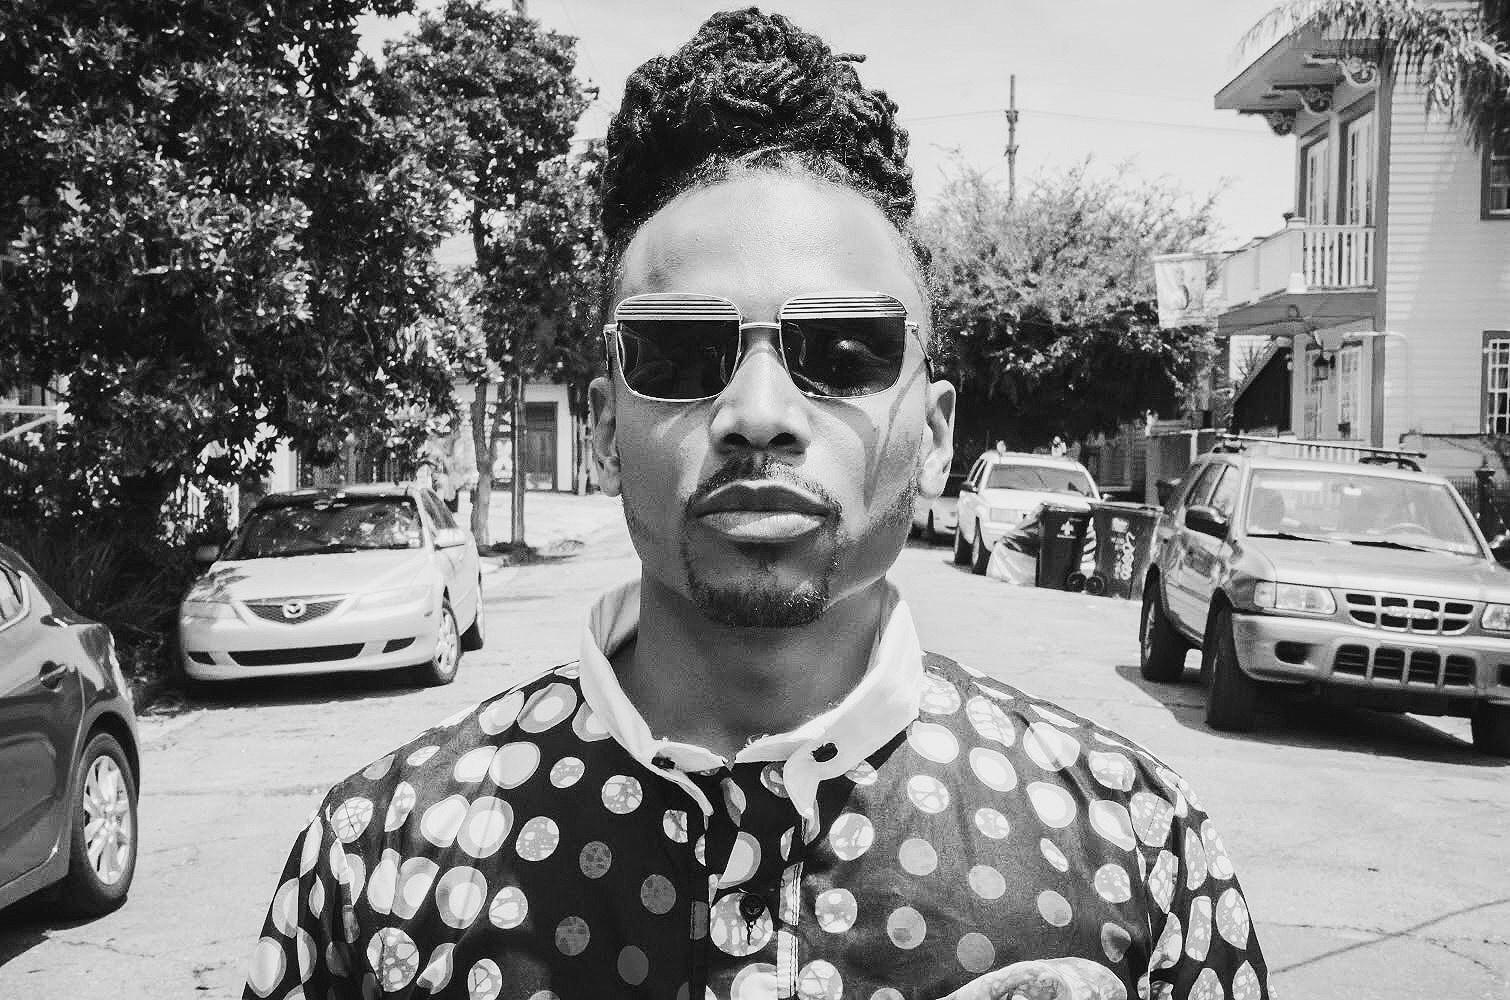 A black-and-white photo of Asante Amin standing in the middle of a street lined with parked cars and a tree and two-story building in the background. Amin wears square-framed metal sunglasses, a shirt patterned with a design of small circles, and squarely faces the camera. 